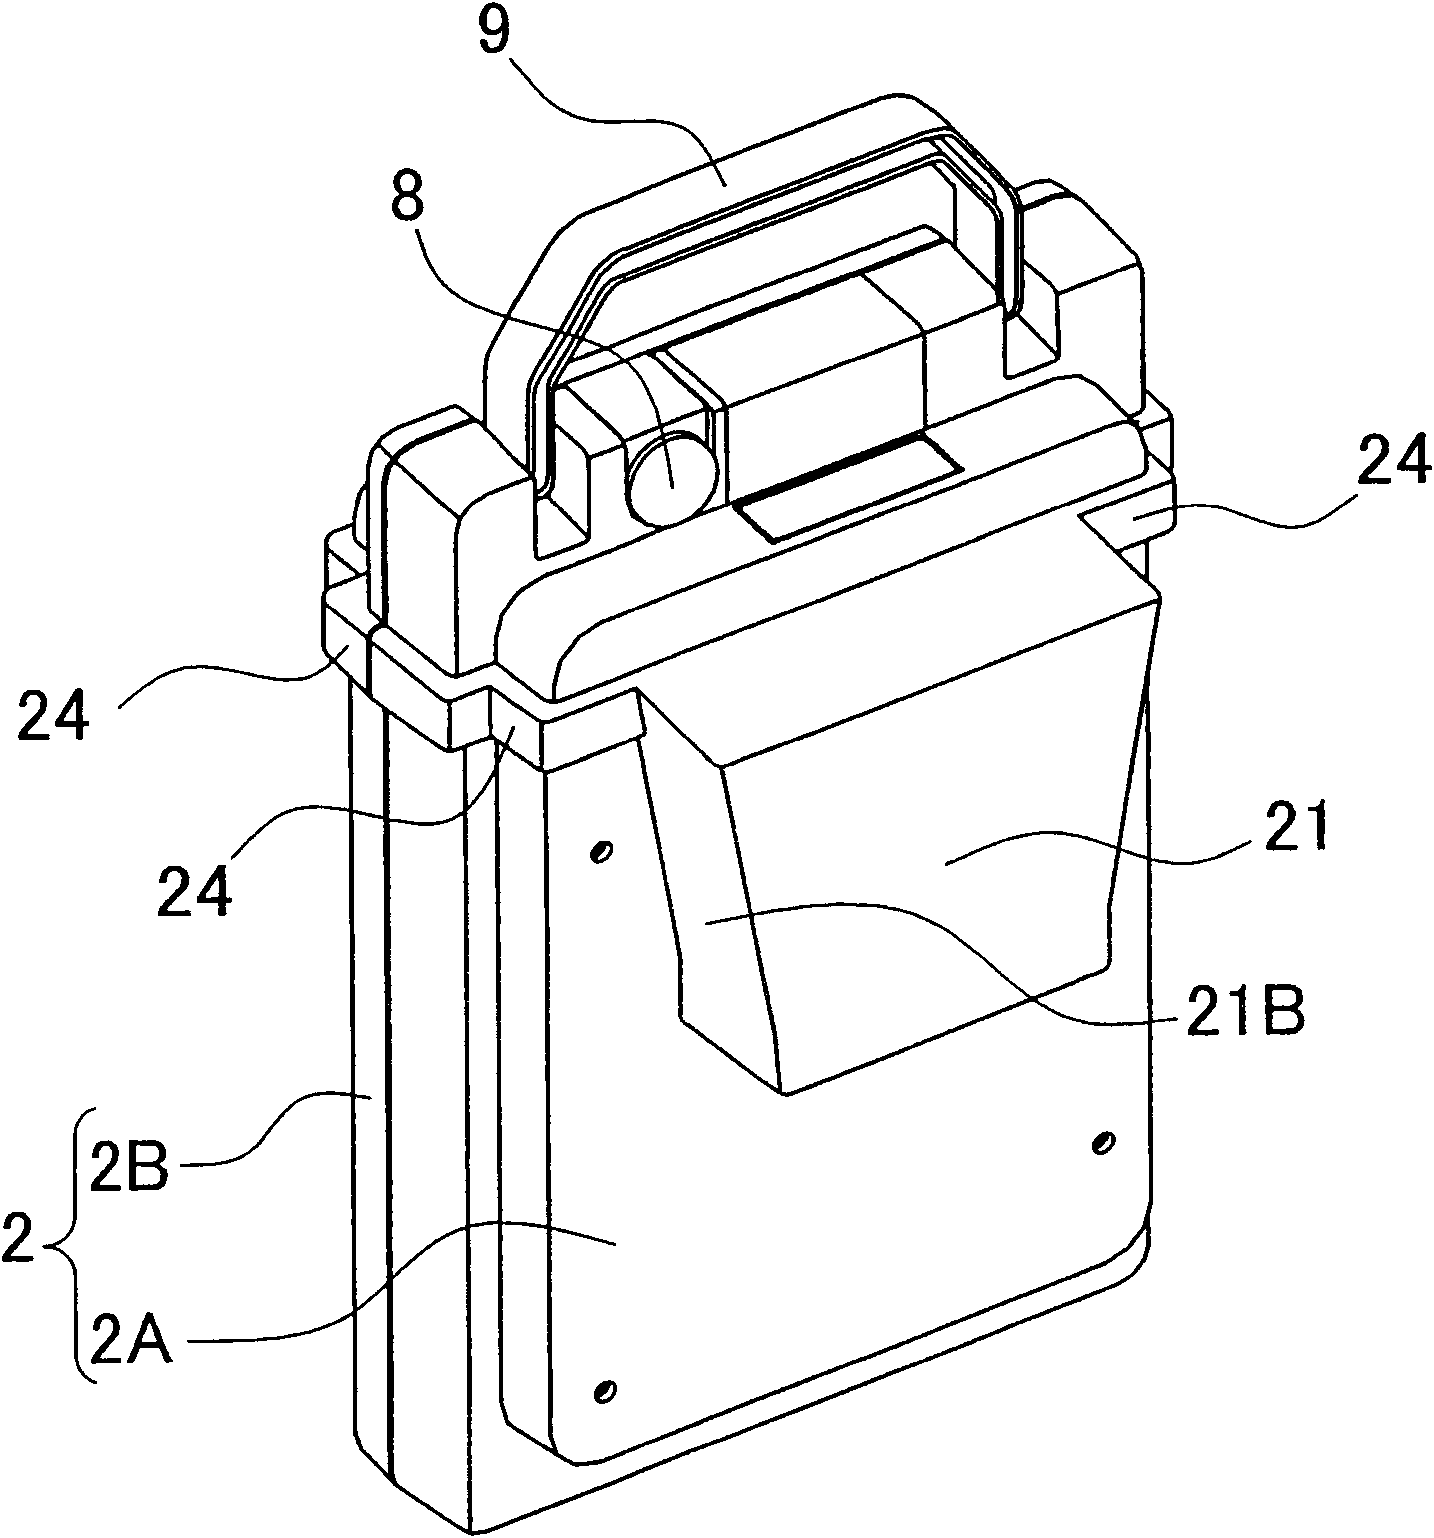 Battery pack loaded and unloaded relatove to electric vehicle tool and electric vehicle tool with the same